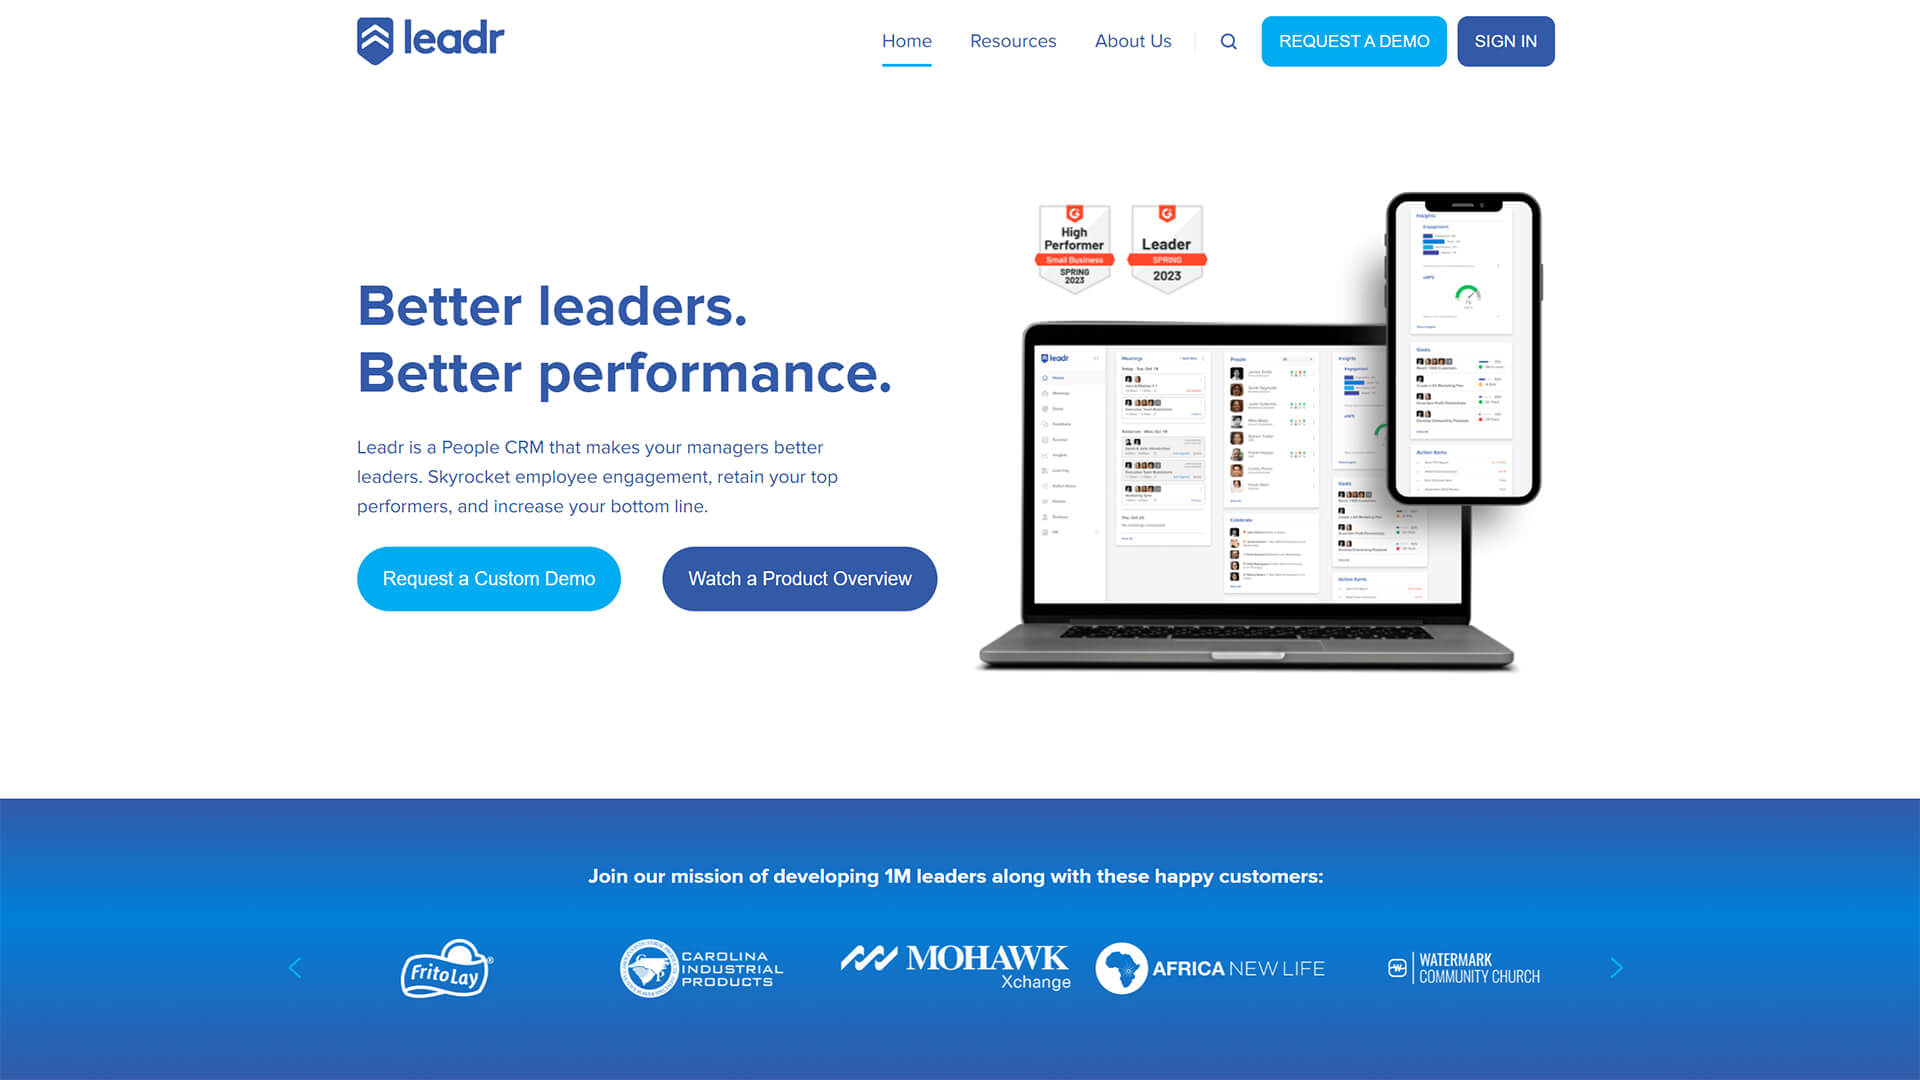 The beautiful leadr.com website created with Act3 on the HubSpot CMS